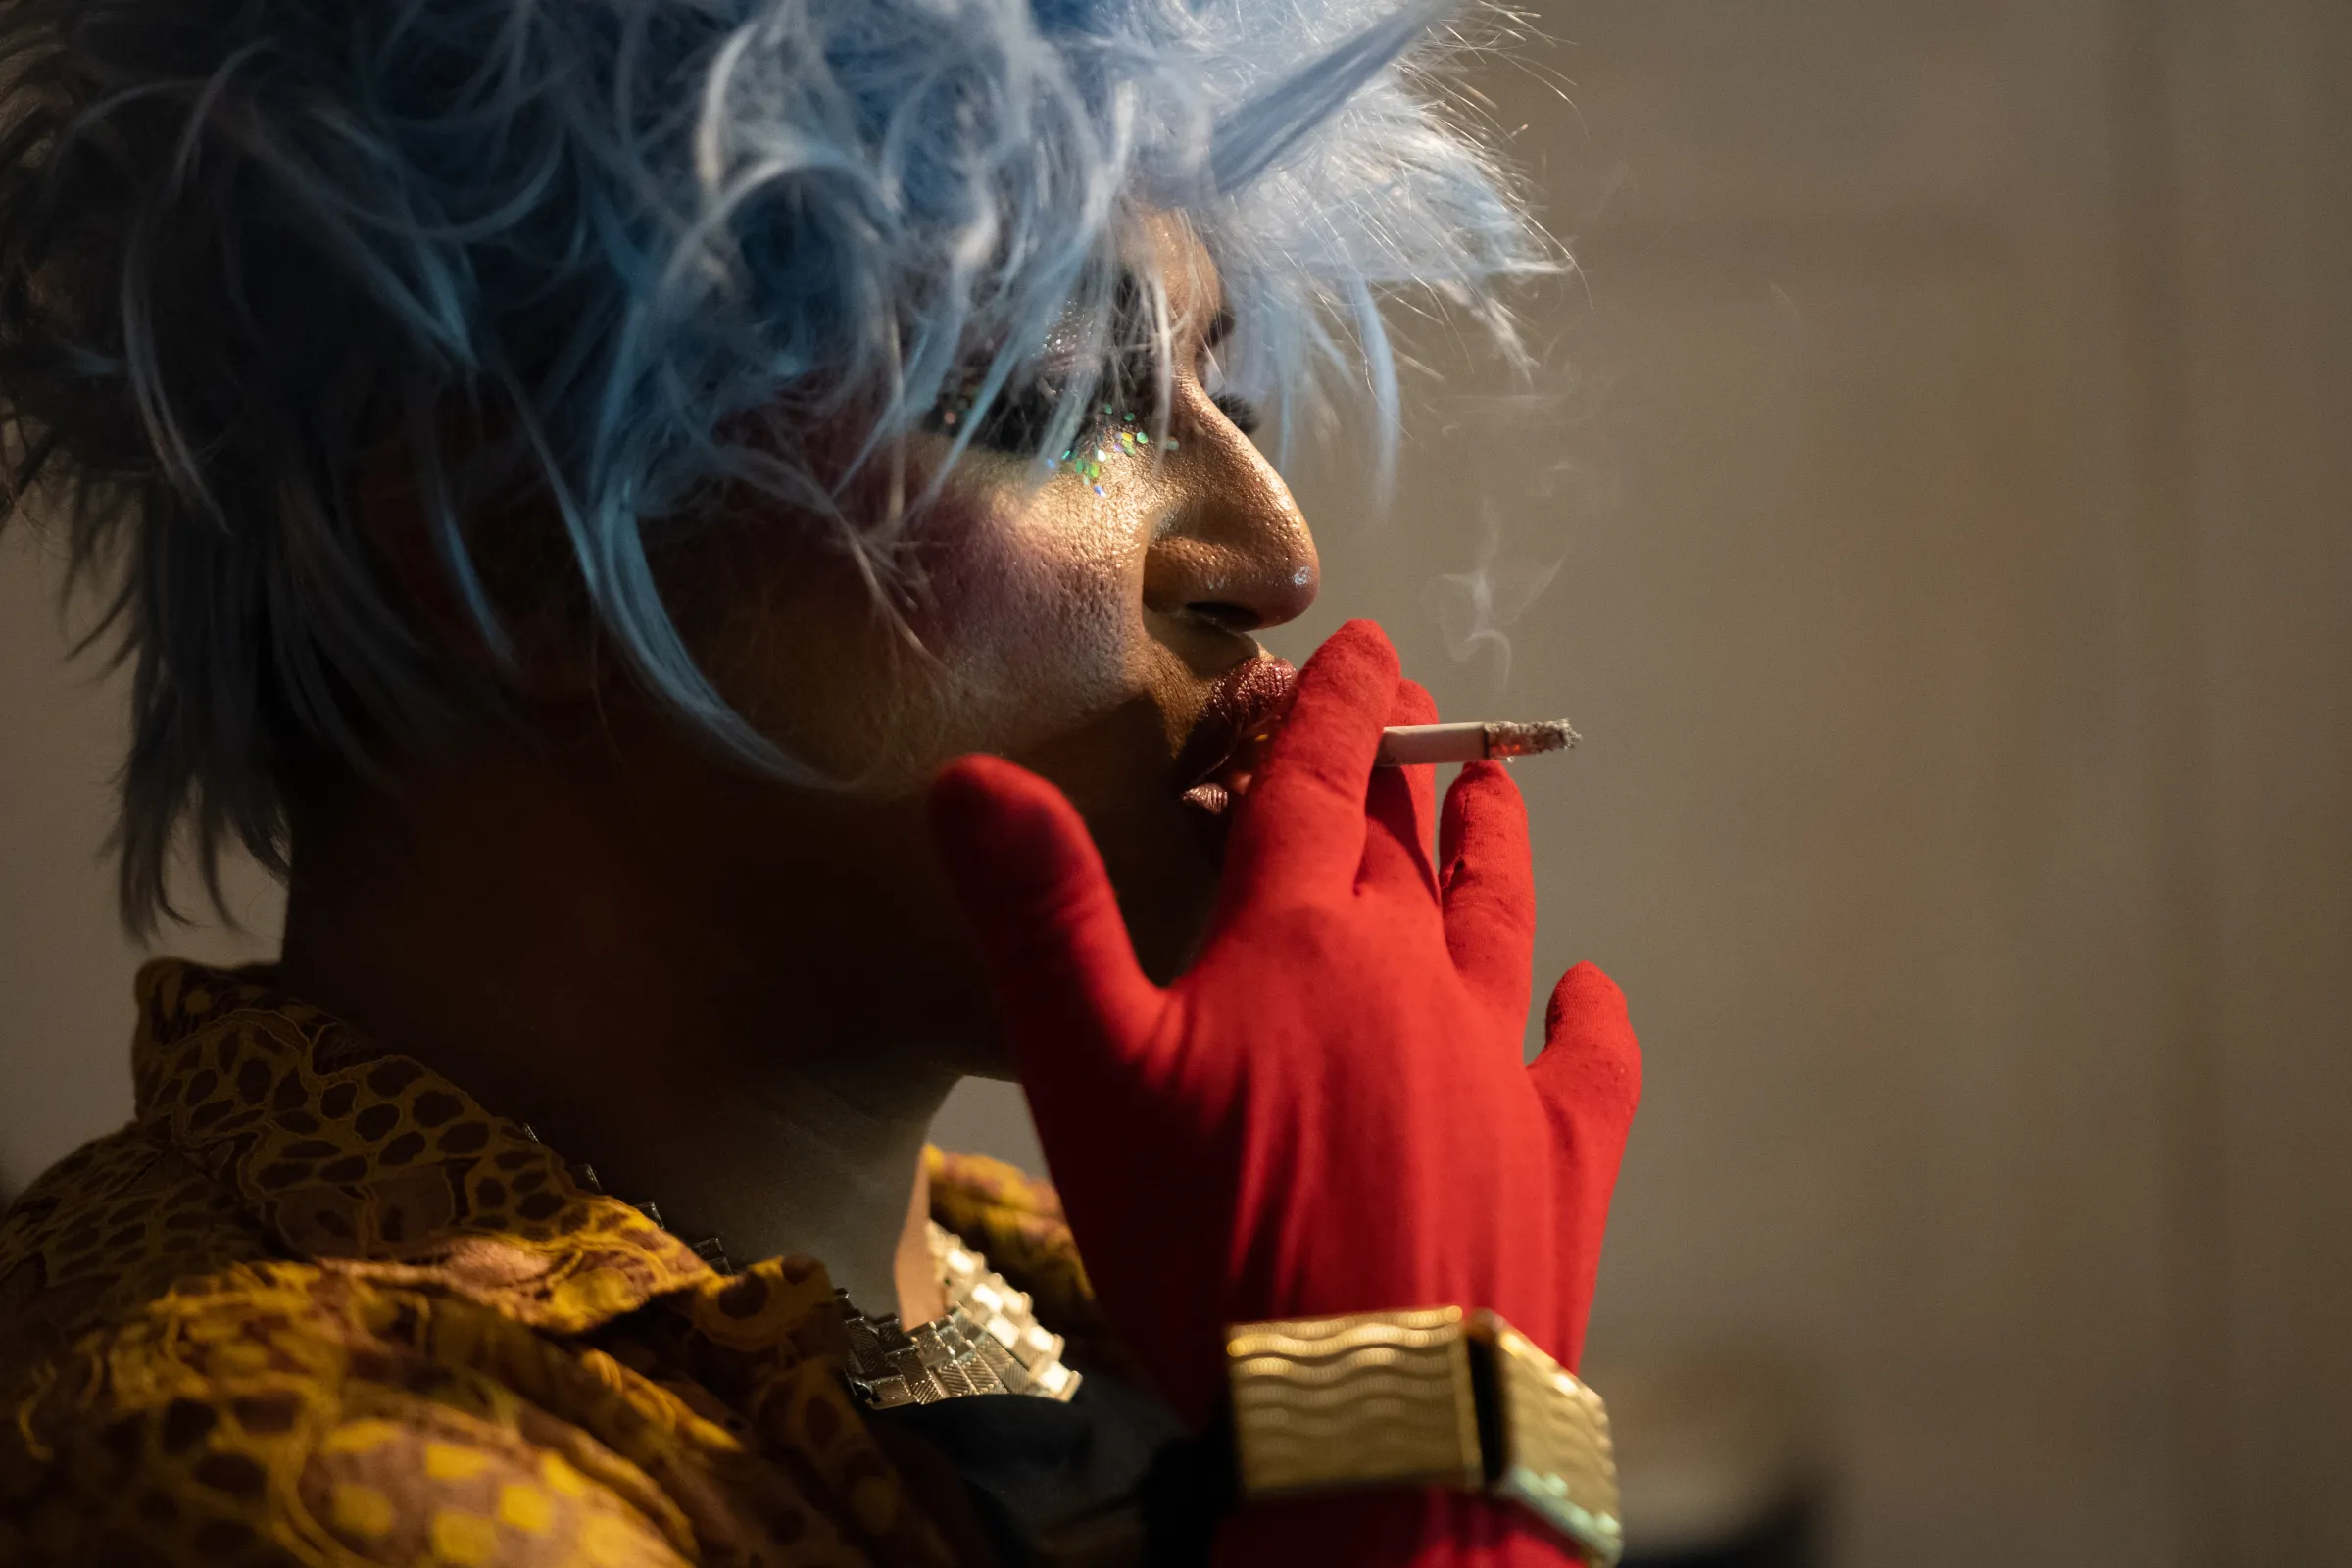 Manu Portillo as Maldad Drag takes a drag from her cigarette backstage before heading out to MC the runway in Asunción, Paraguay, February 22, 2023